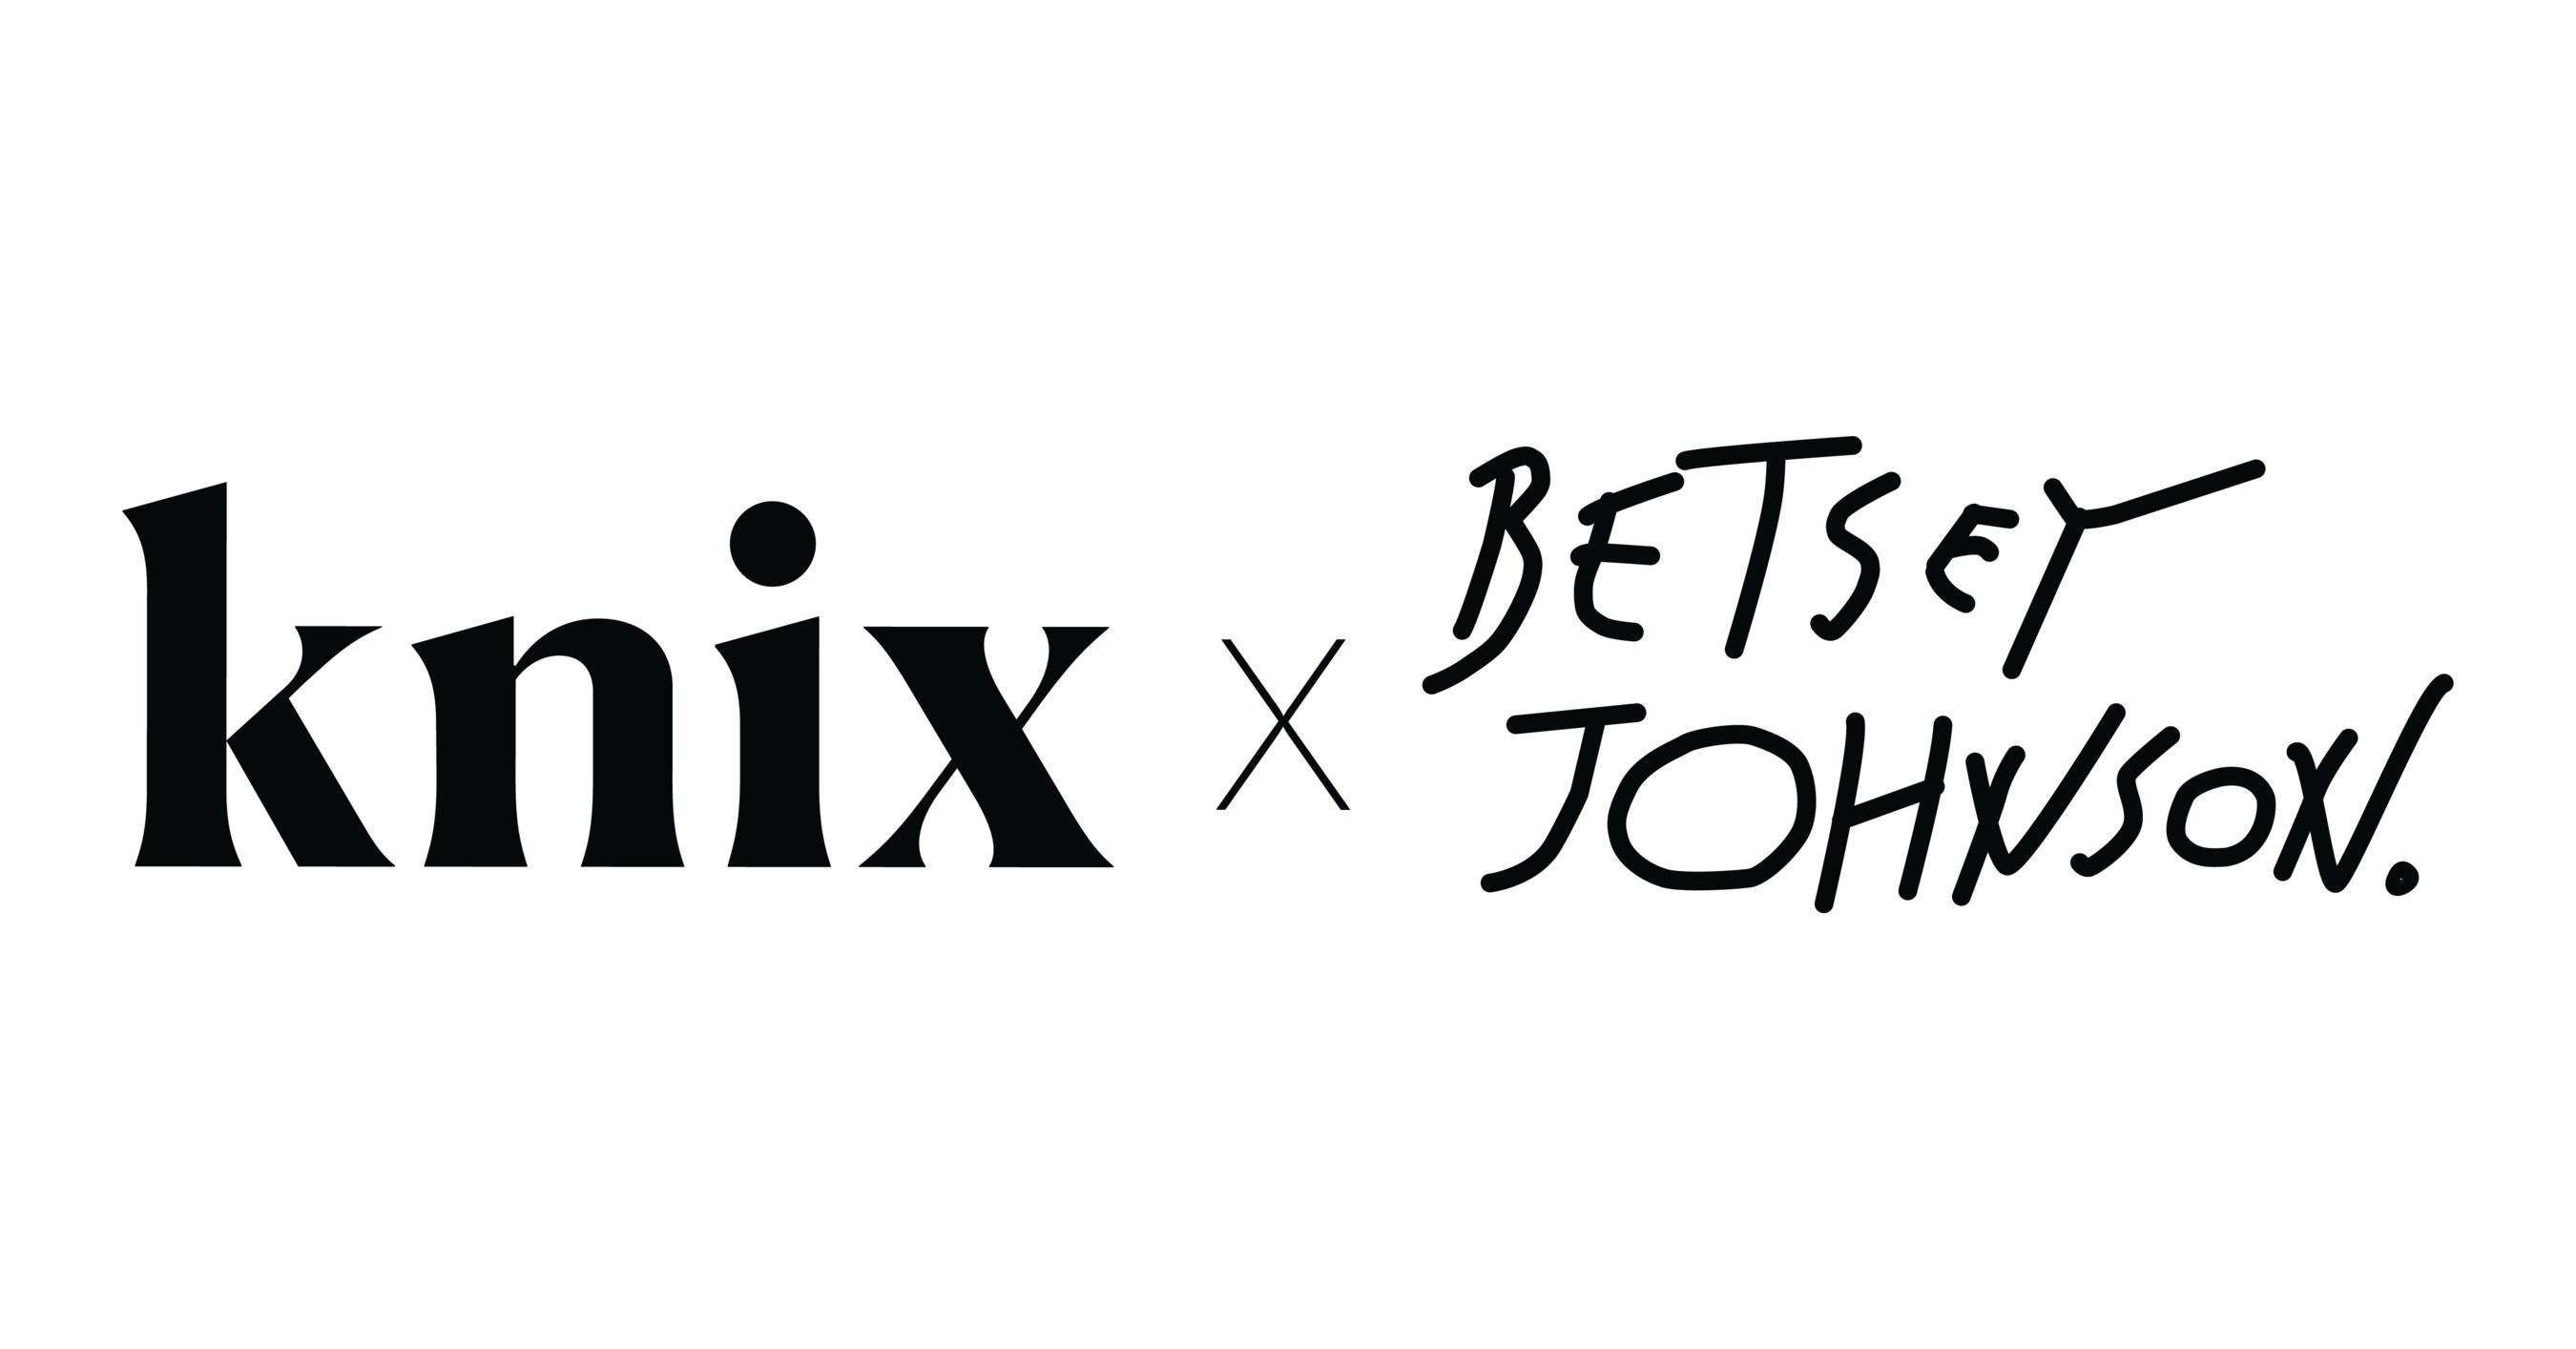 Knix and Betsey Johnson collaborate on the boldest and brightest